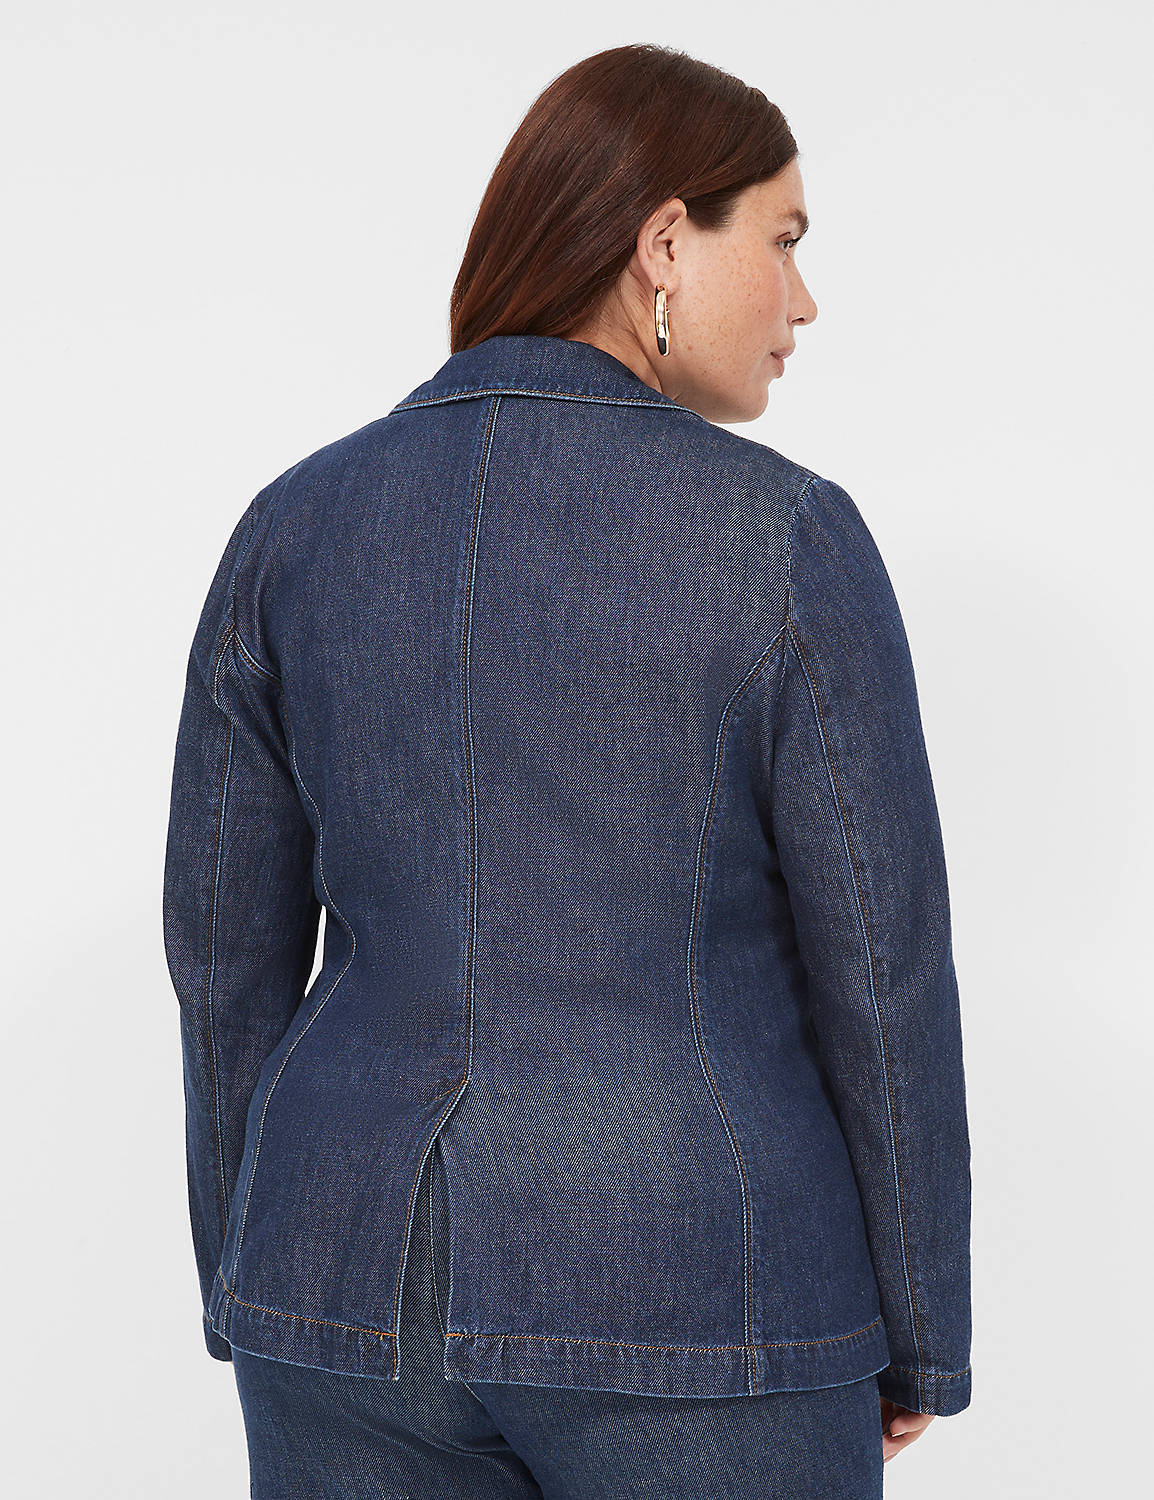 FITTED DENIM BLAZER - RINSE 1138869 Product Image 2